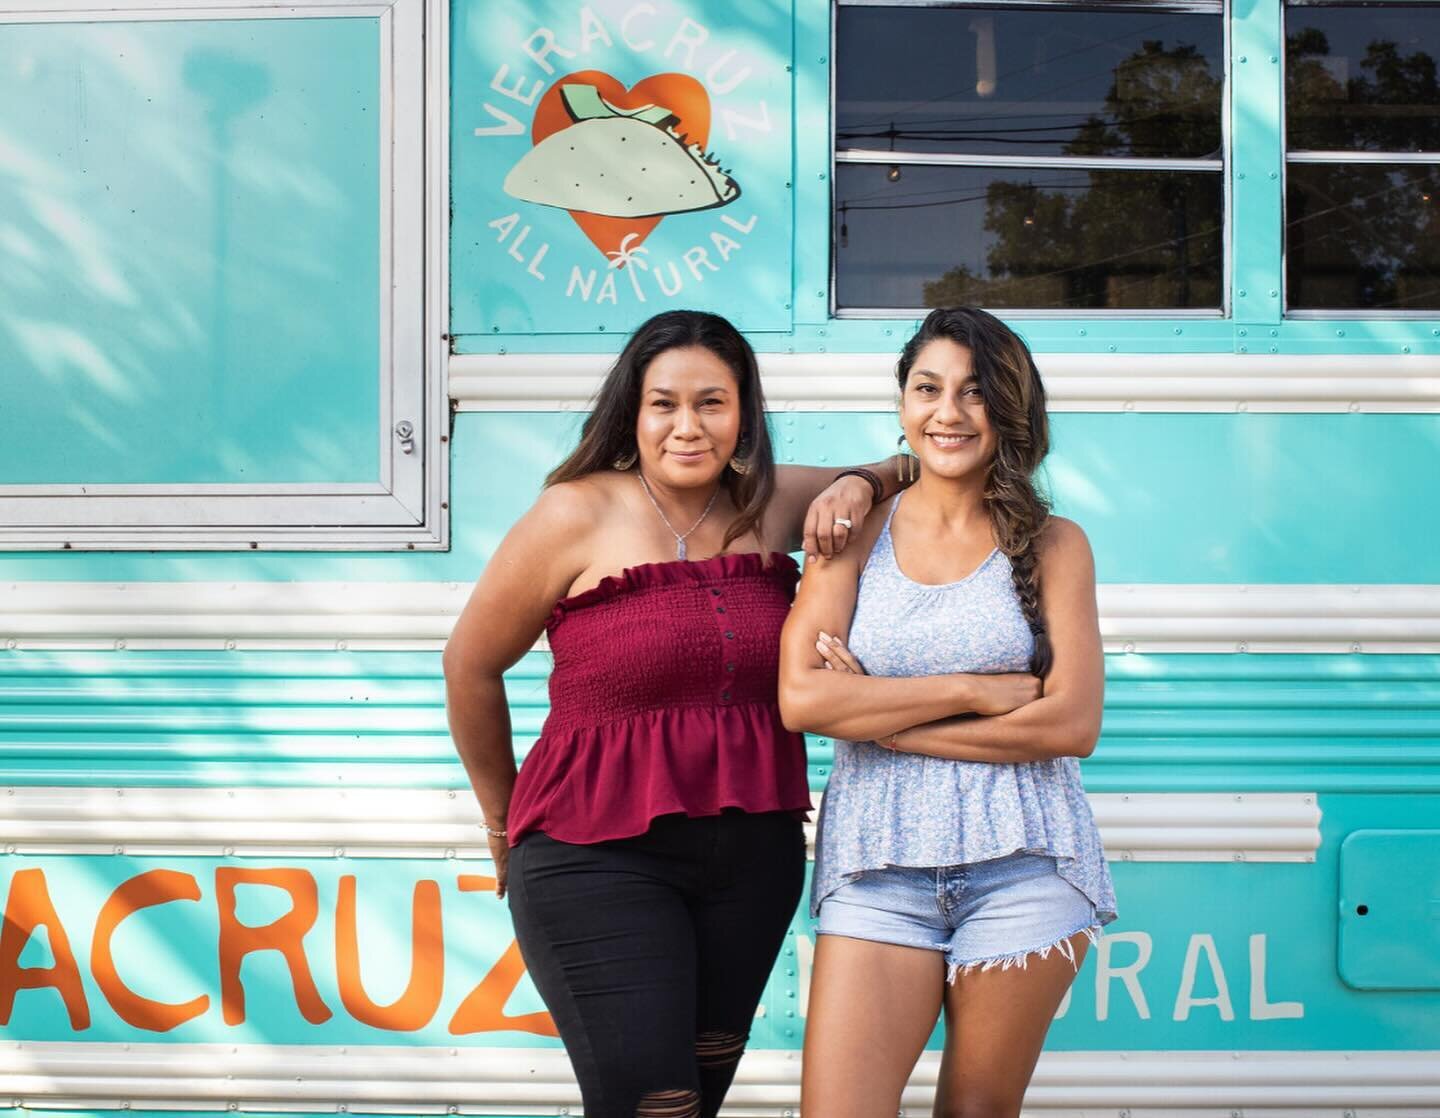 Join us for our series of women chefs collaborating with us every Wednesday this March! 

This week, we&rsquo;re honored to have @Chef.Reyna &amp; @maritzadeveracruz sisters/owners of the incredible @VeracruzTacos, at Garbos on Lamar. Grateful for th